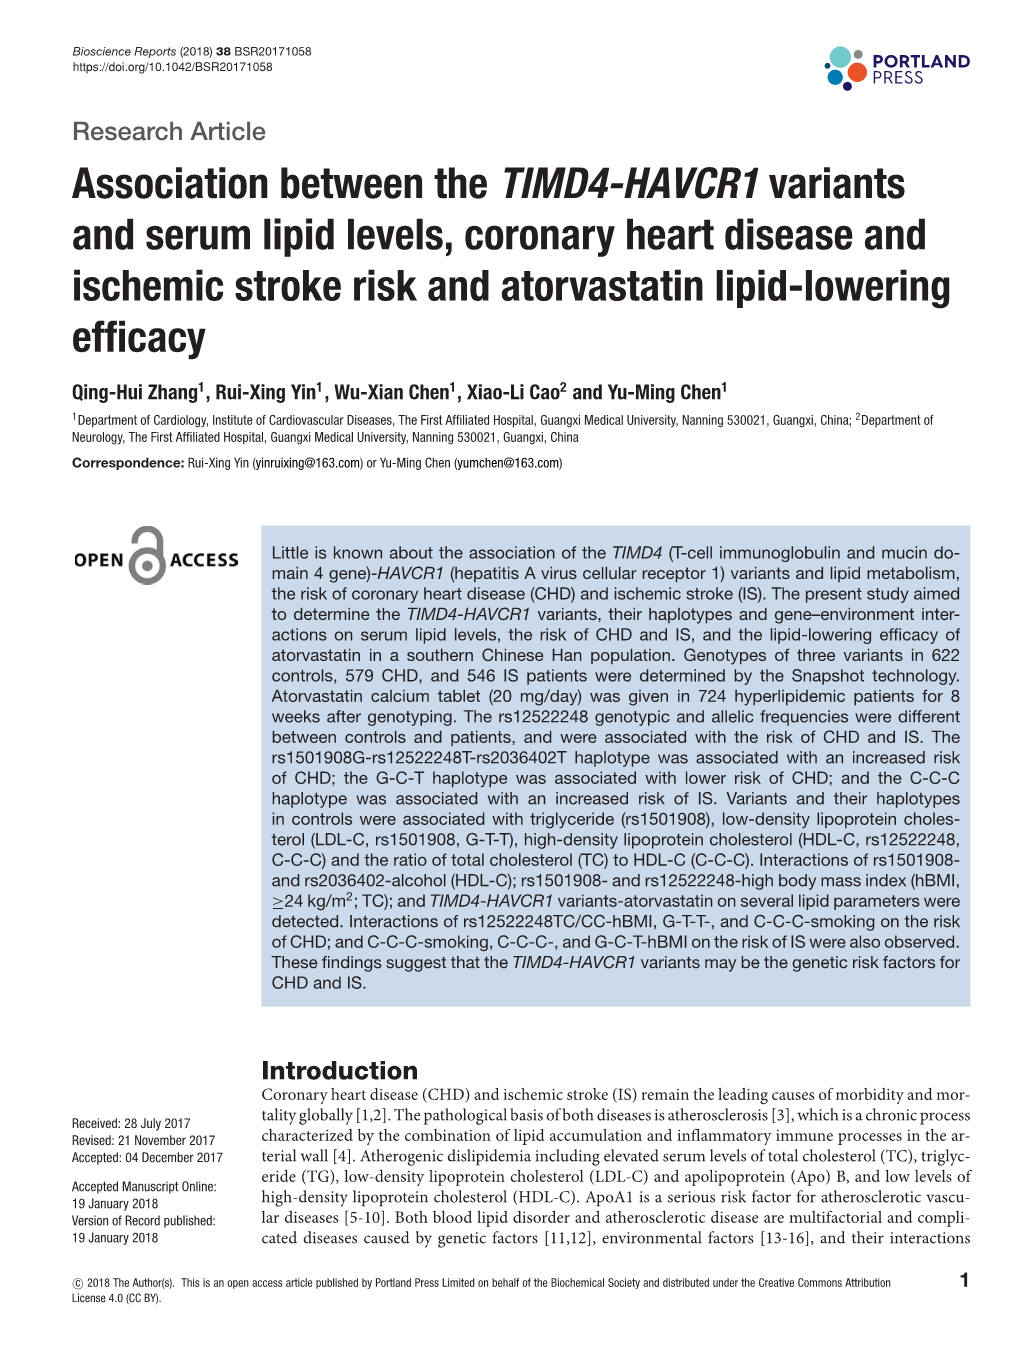 Association Between the TIMD4-HAVCR1 Variants and Serum Lipid Levels, Coronary Heart Disease and Ischemic Stroke Risk and Atorvastatin Lipid-Lowering Efﬁcacy